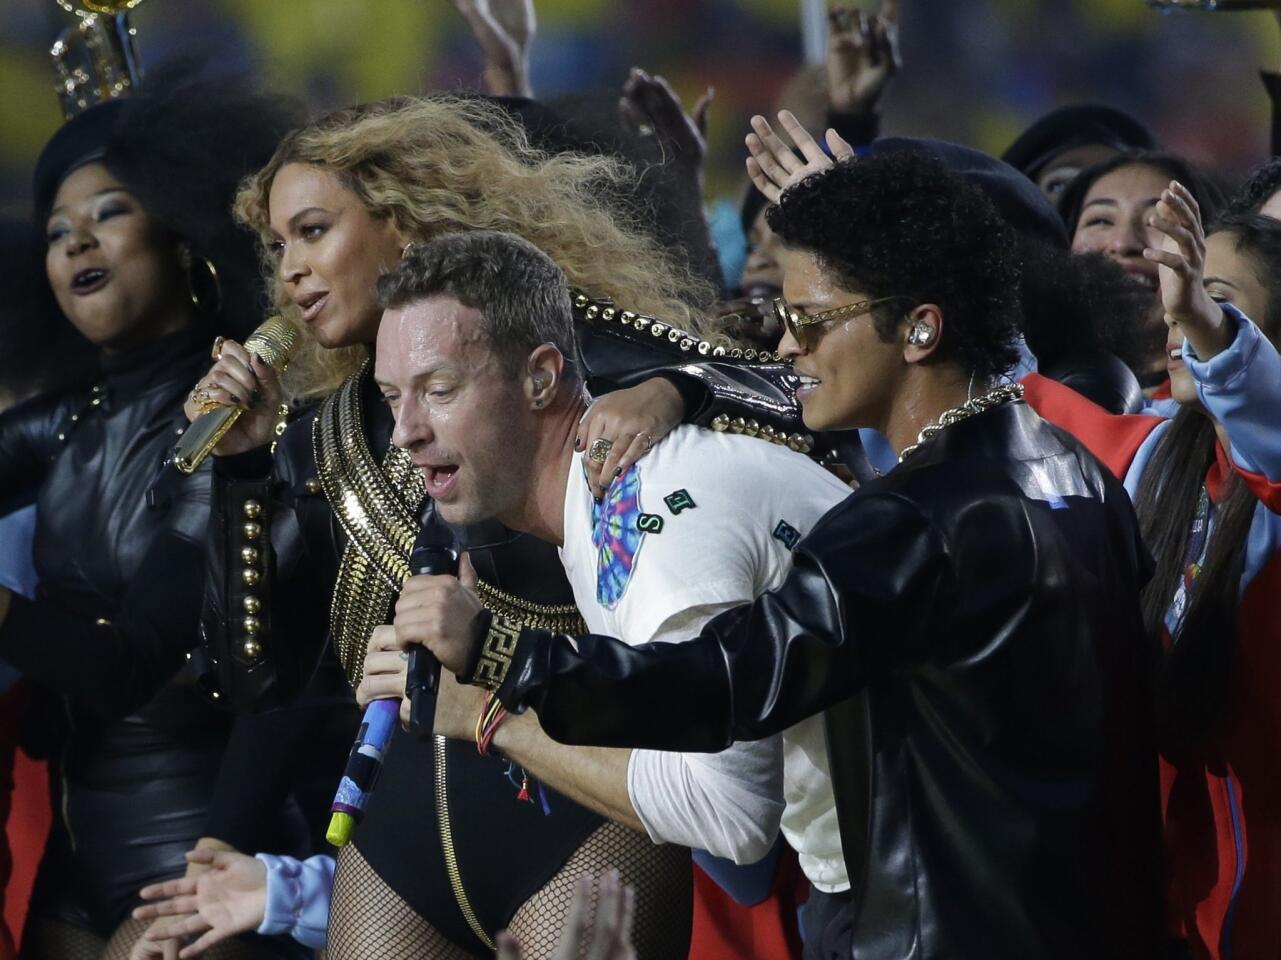 Coldplay singer Chris Martin performs with Beyonce and Bruno Mars during halftime of the NFL Super Bowl 50 football game Sunday, Feb. 7, 2016. AP Photo/Marcio Jose Sanchez